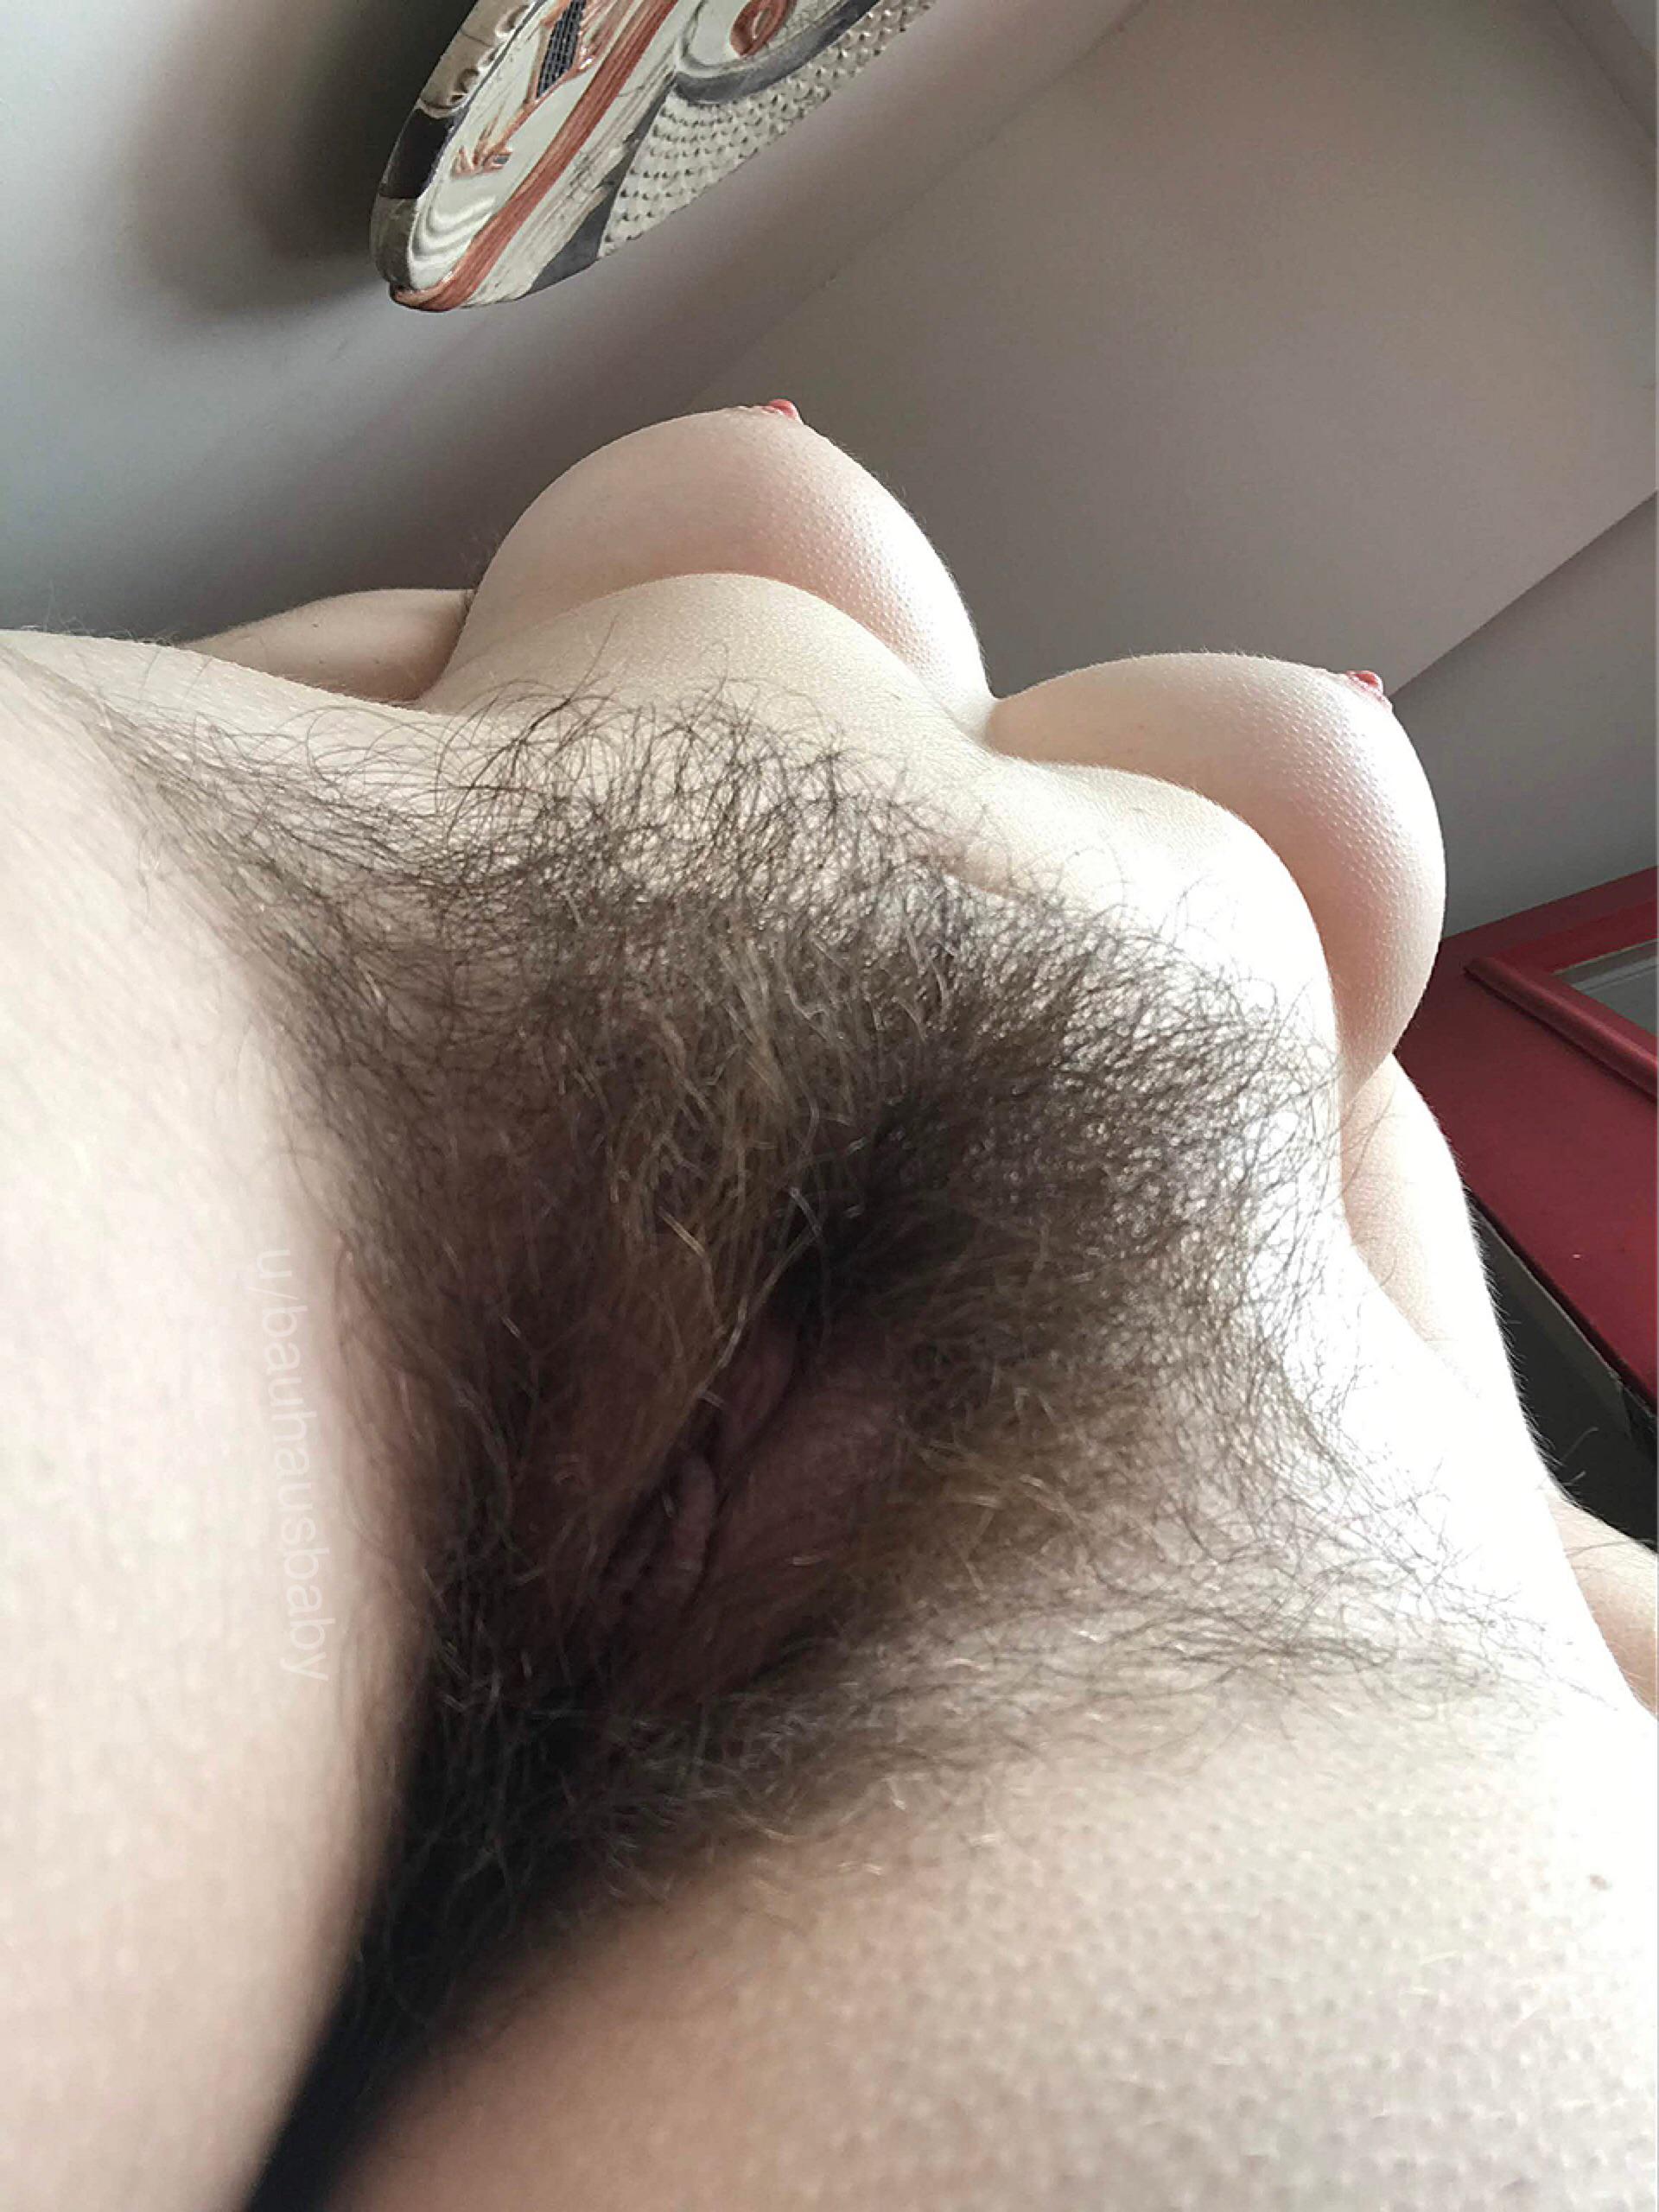 POV standing over you with my hairy little pussy pic picture